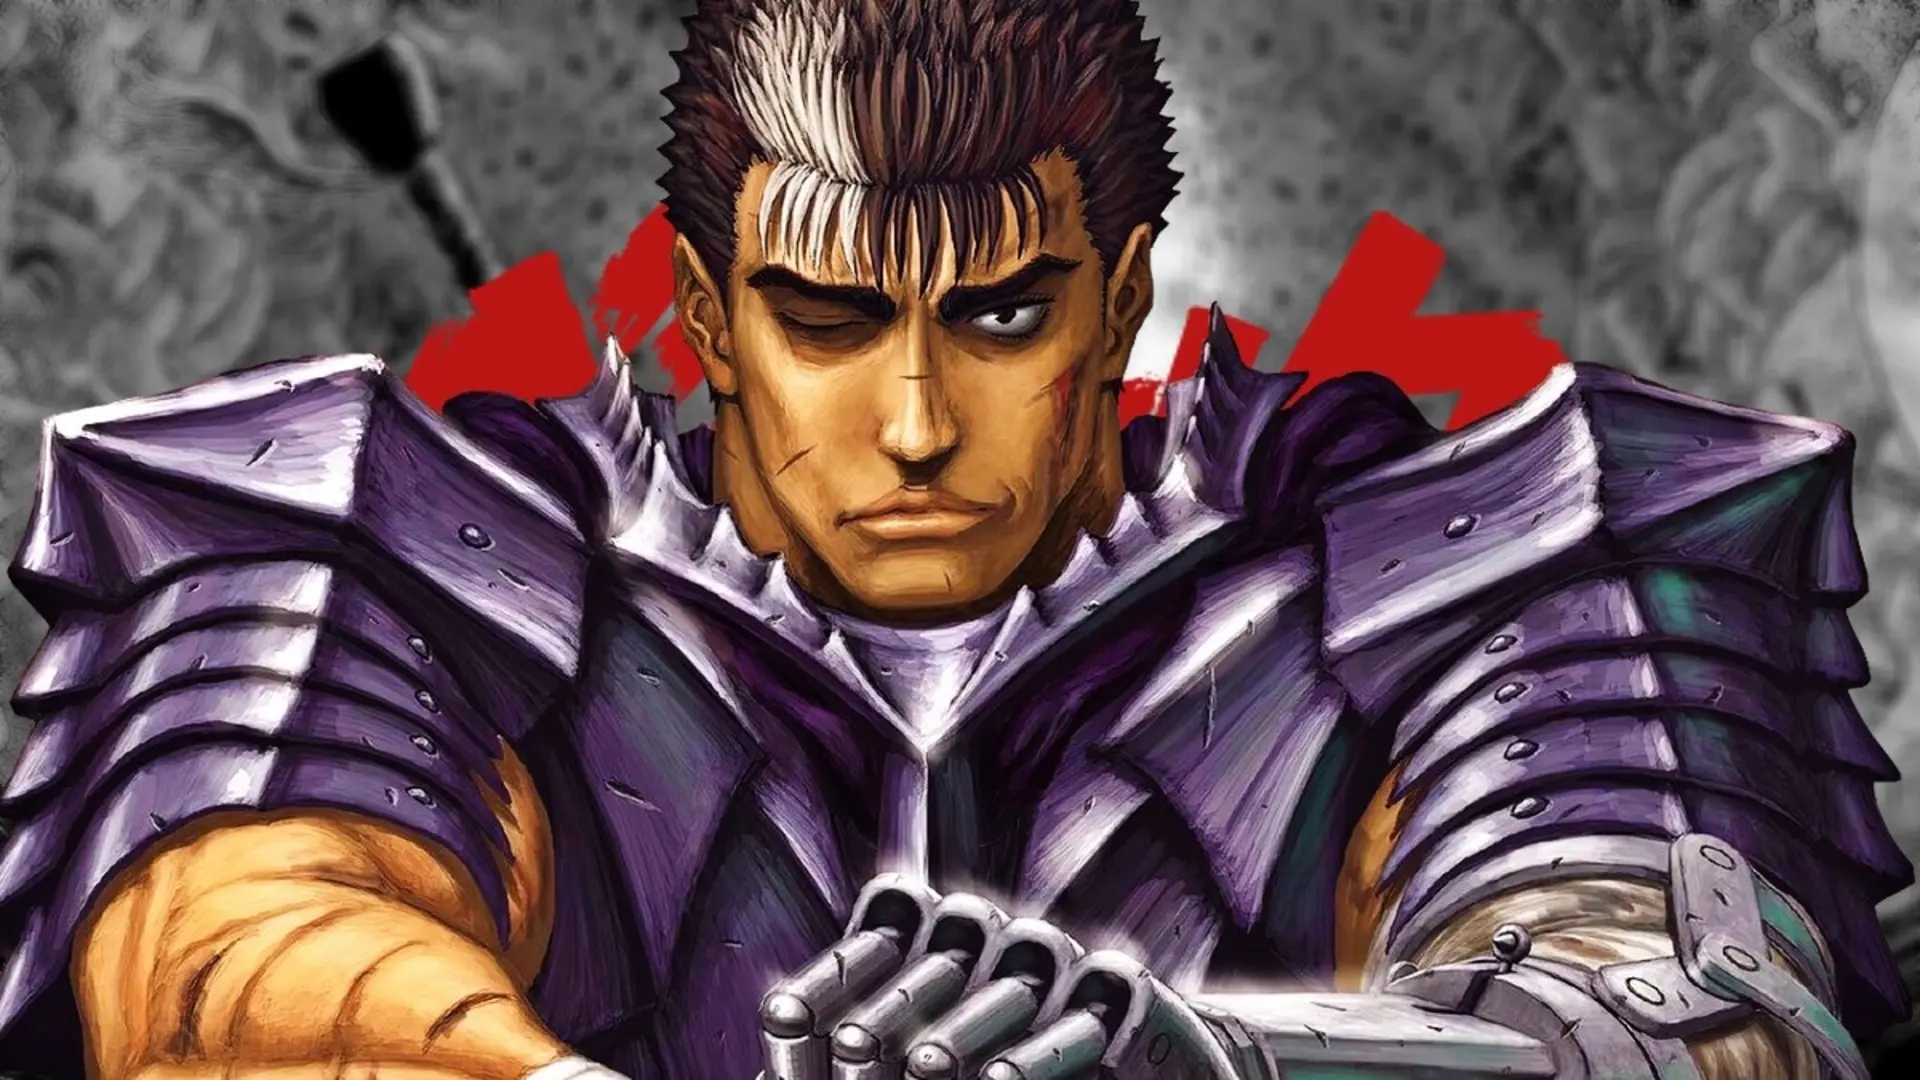 Anticipating Berserk Chapter 376 A New Chapter in Guts' Epic Saga.